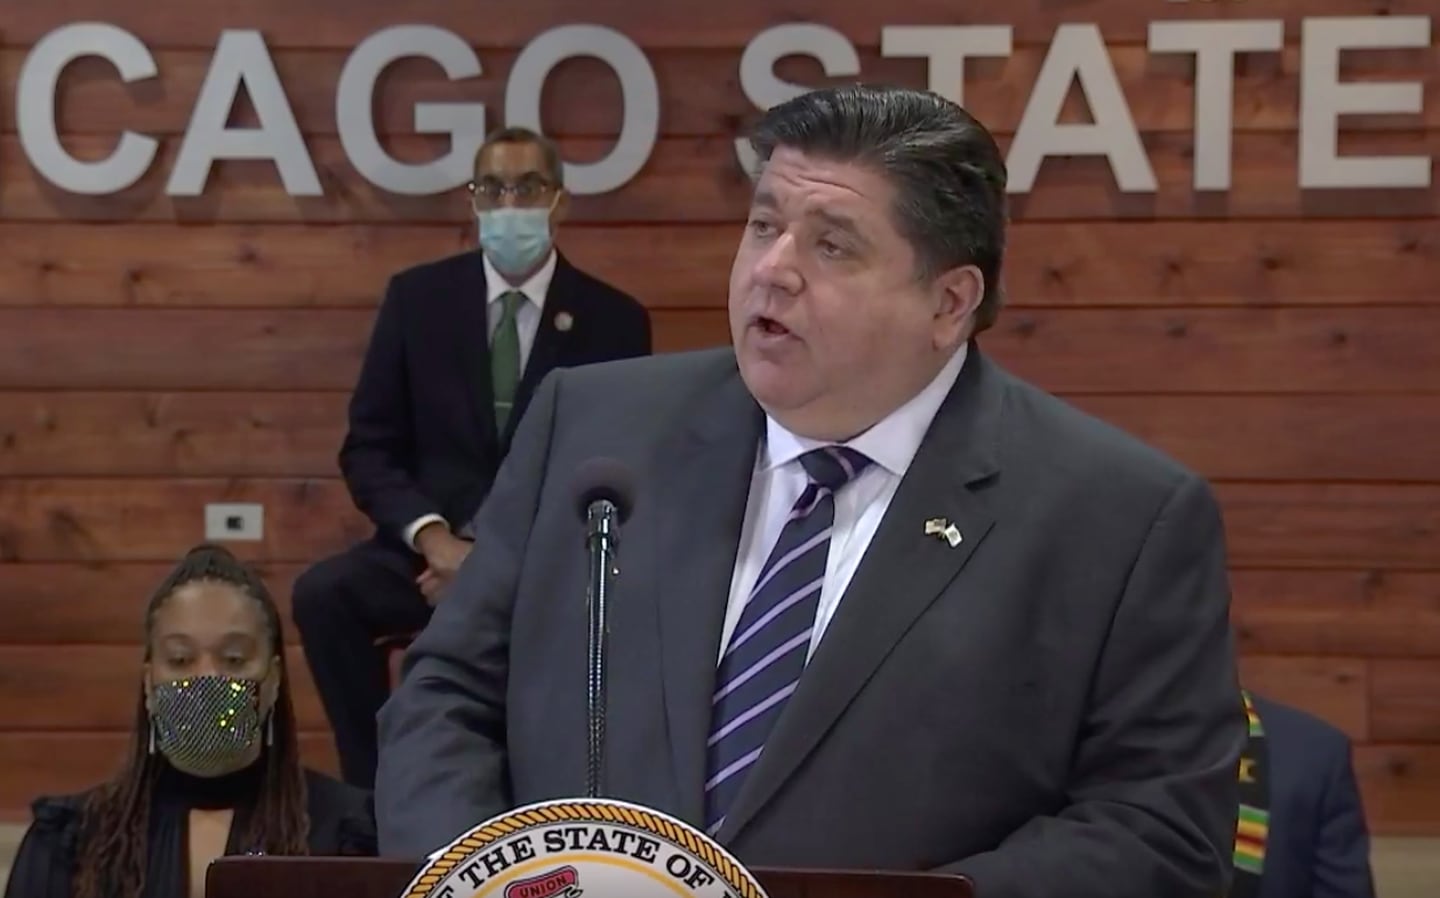 Gov. JB Pritzker speaks at Chicago State University  on Feb. 22, 2021 before he signs the sweeping criminal justice reform bill passed in the General Assembly earlier this year.